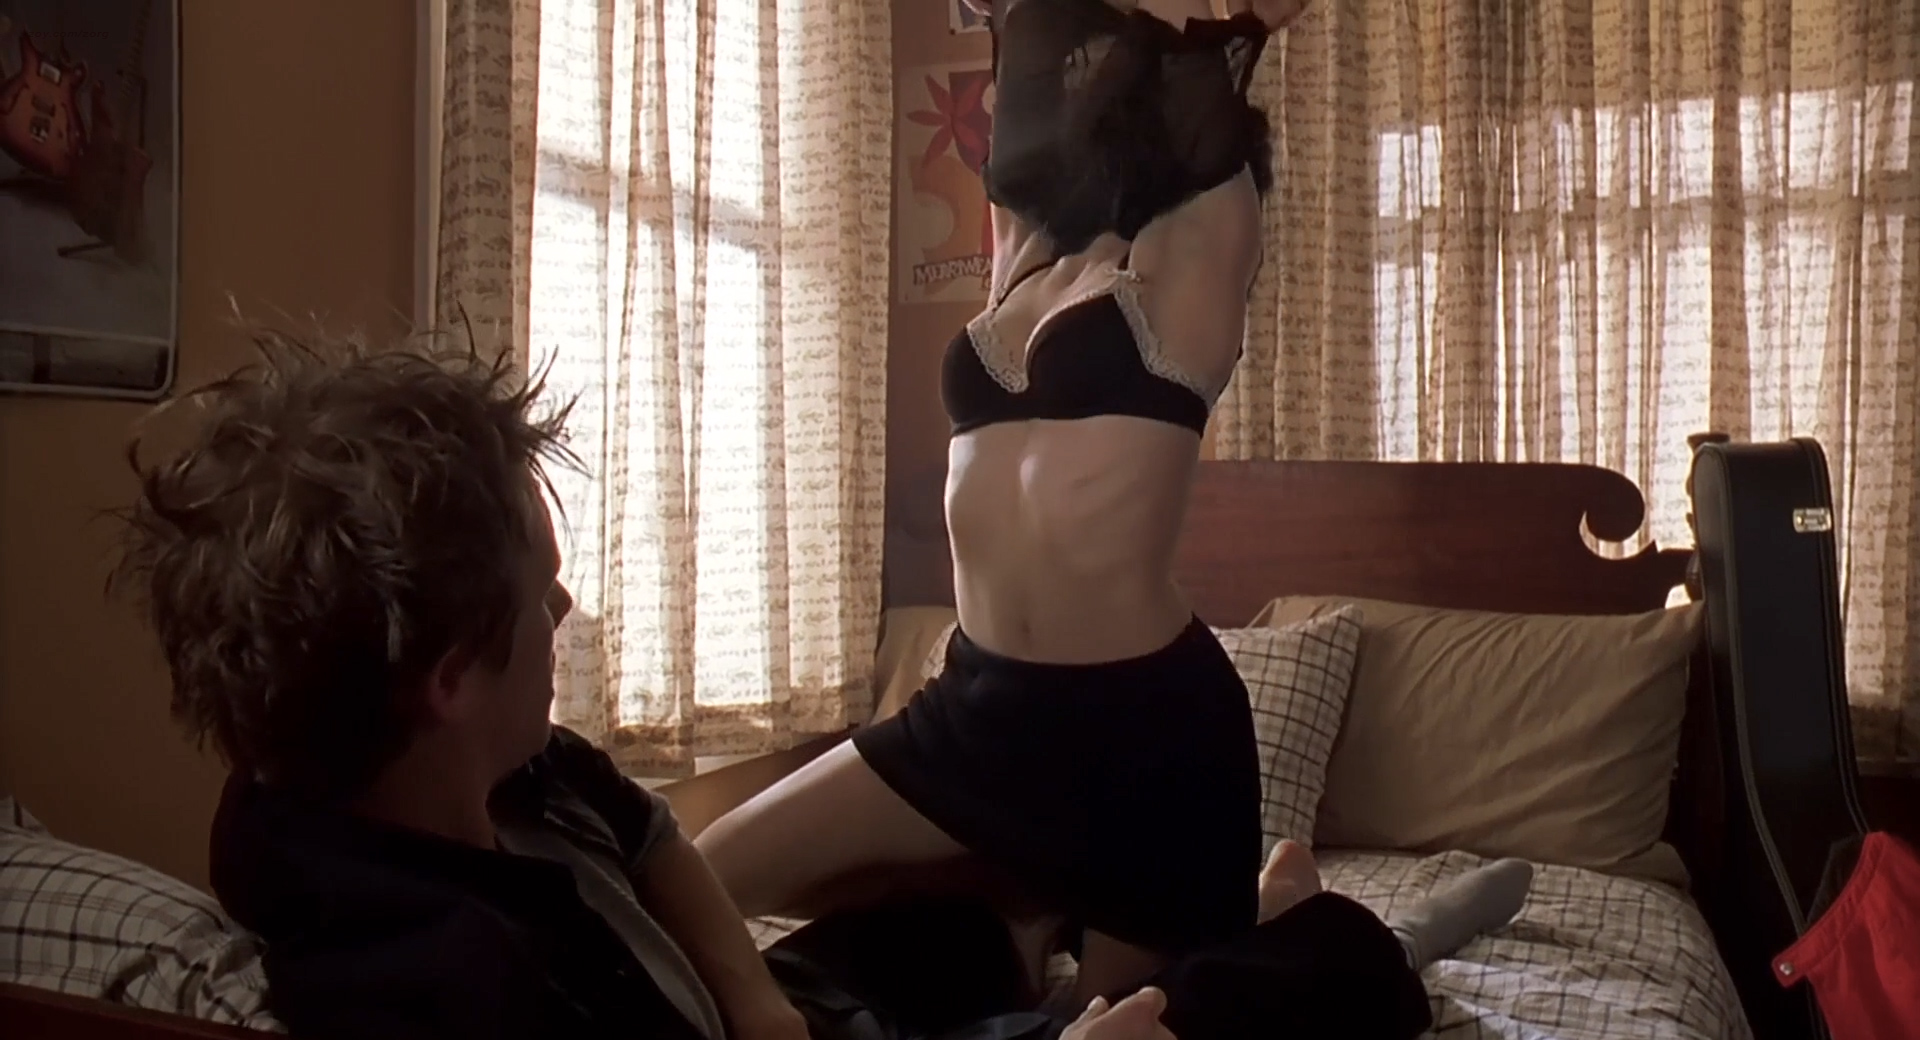 Brittany Murphy Hot In Bra And Panties And Clementine Ford.